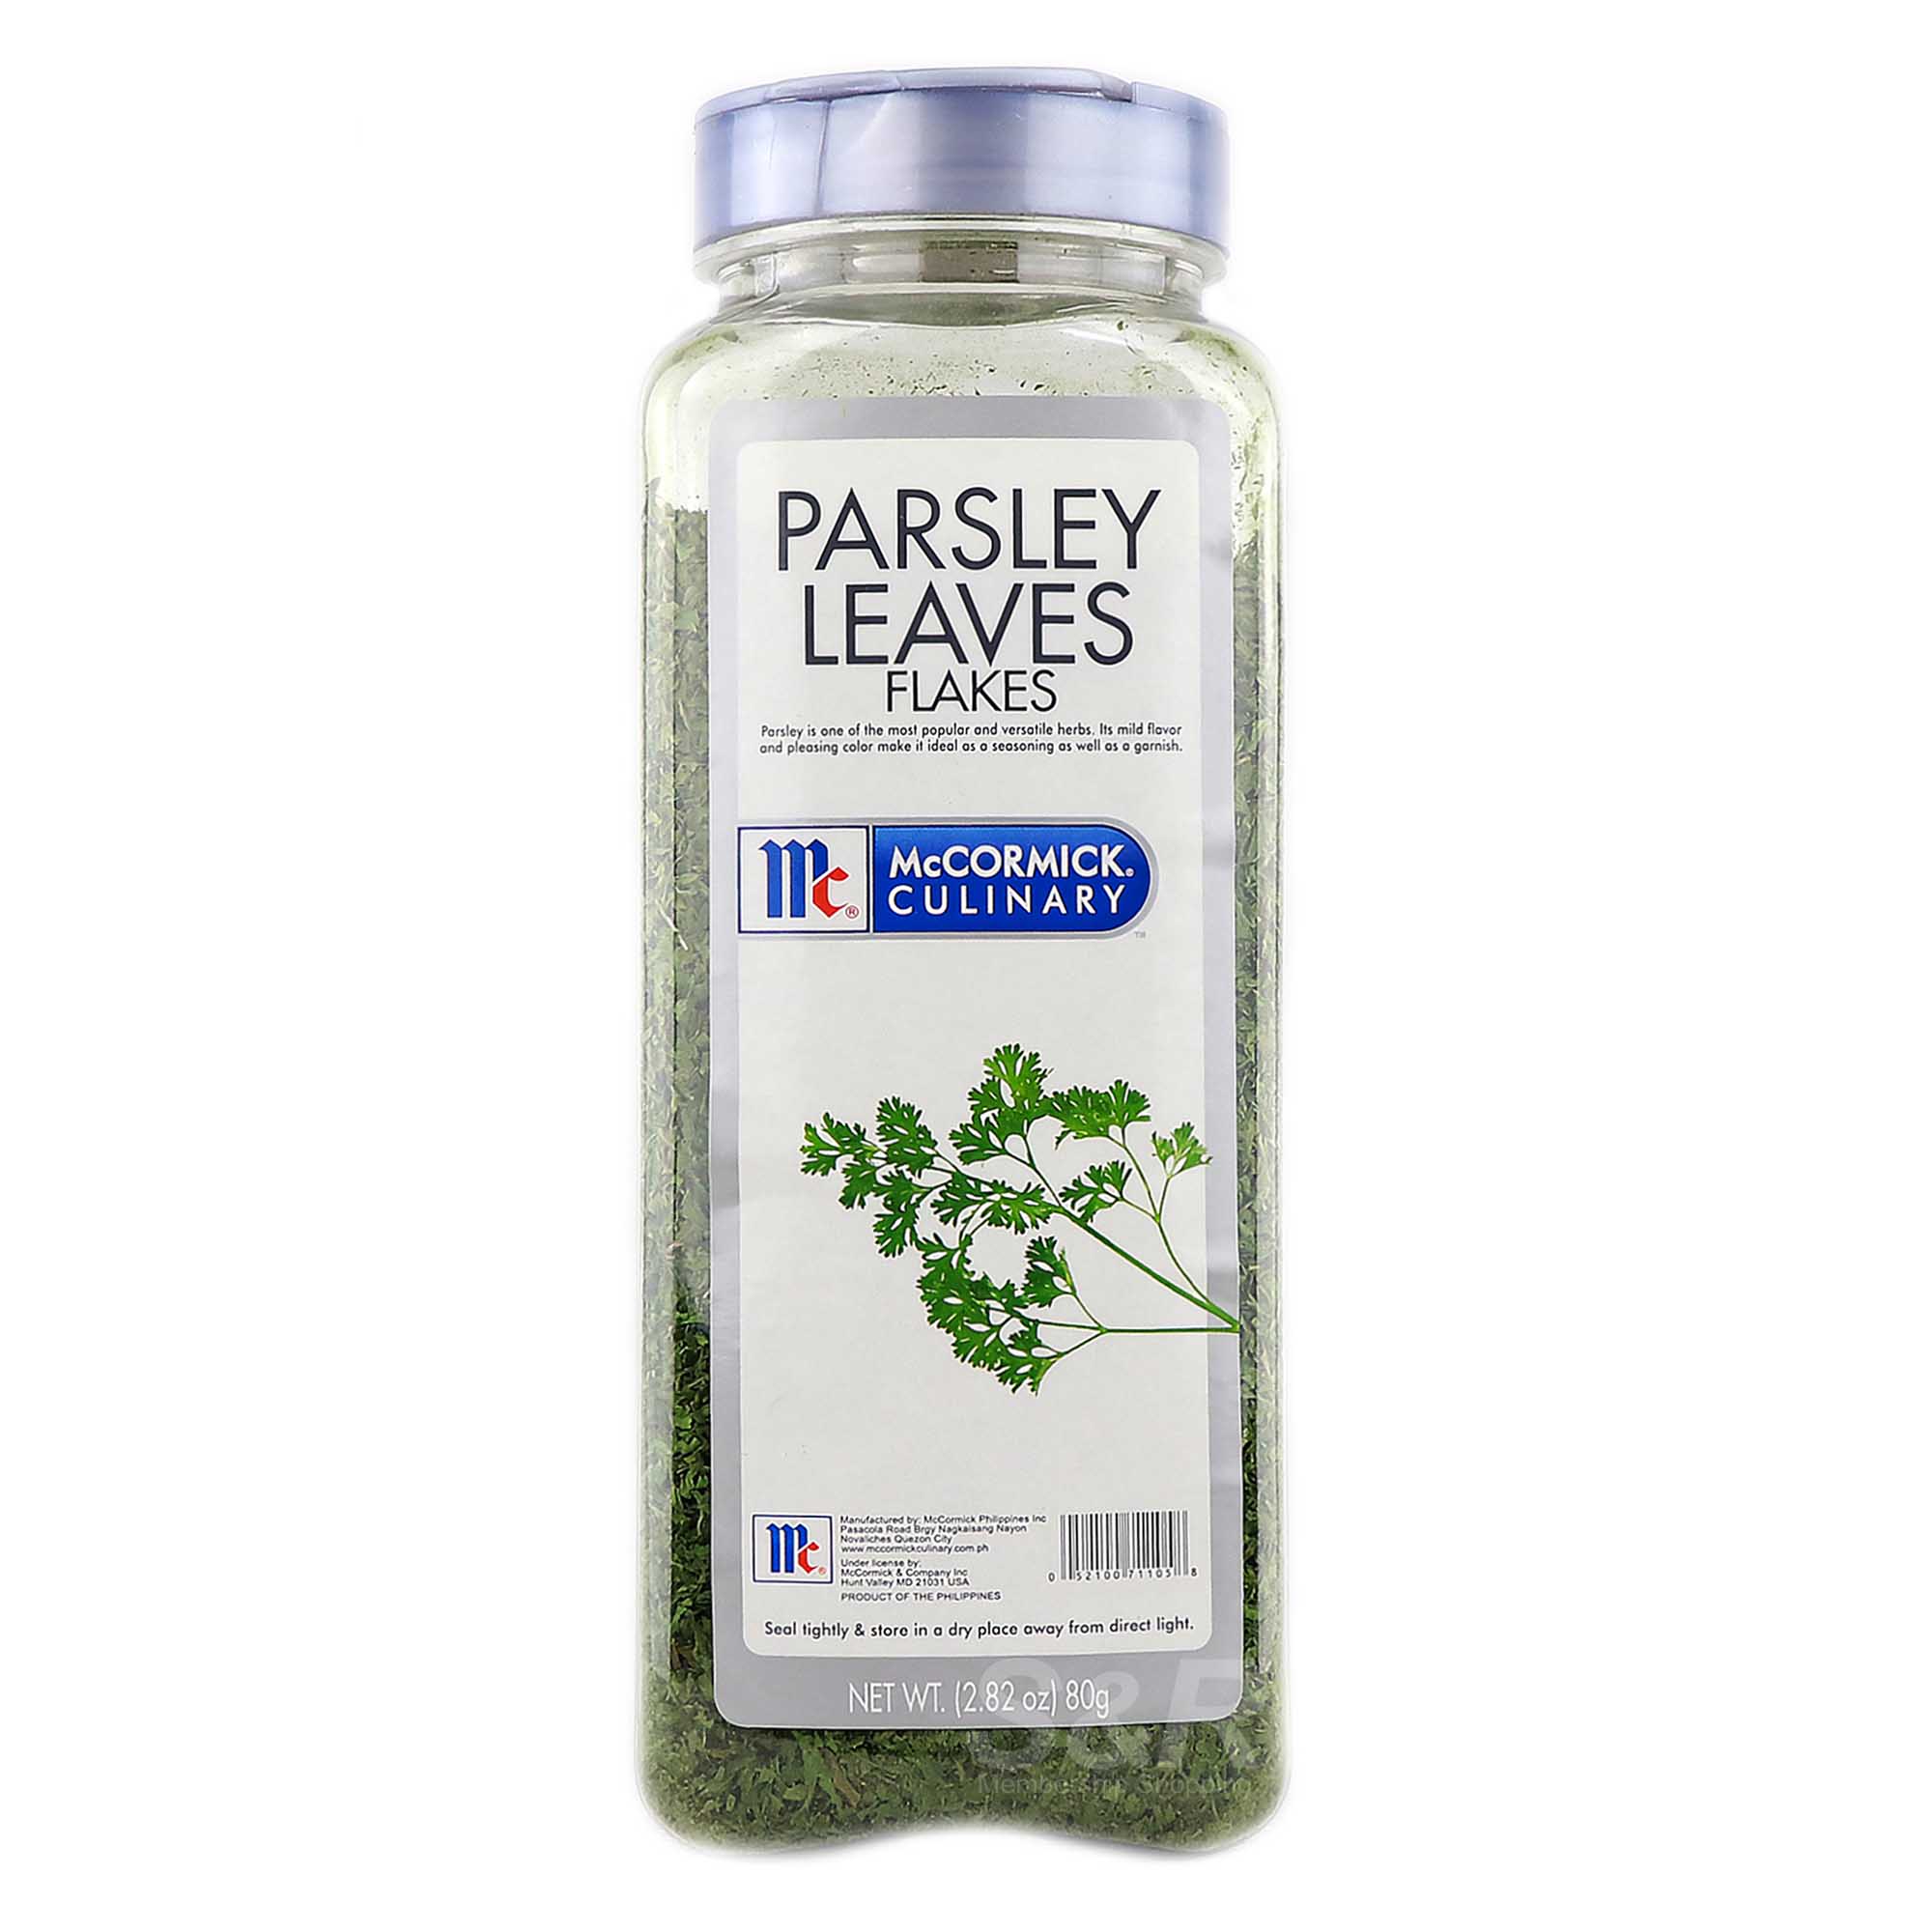 McCormick Culinary Parsley Leaves Flakes 80g